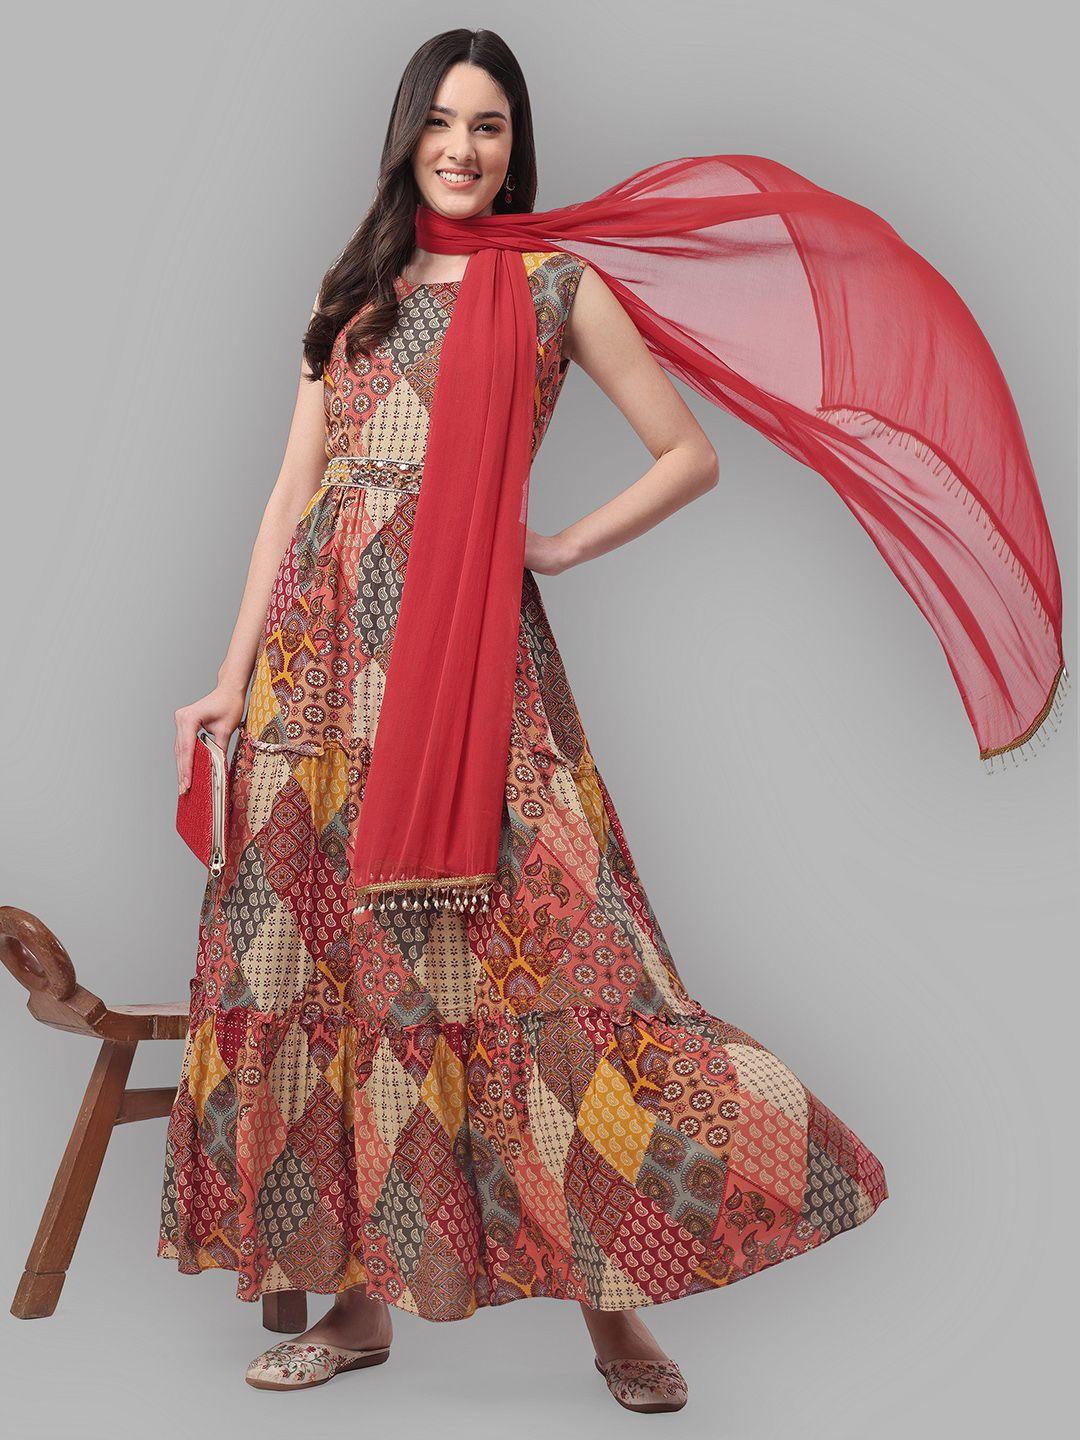 kalini ethnic motifs printed sequined tiered maxi belted ethnic dress with dupatta